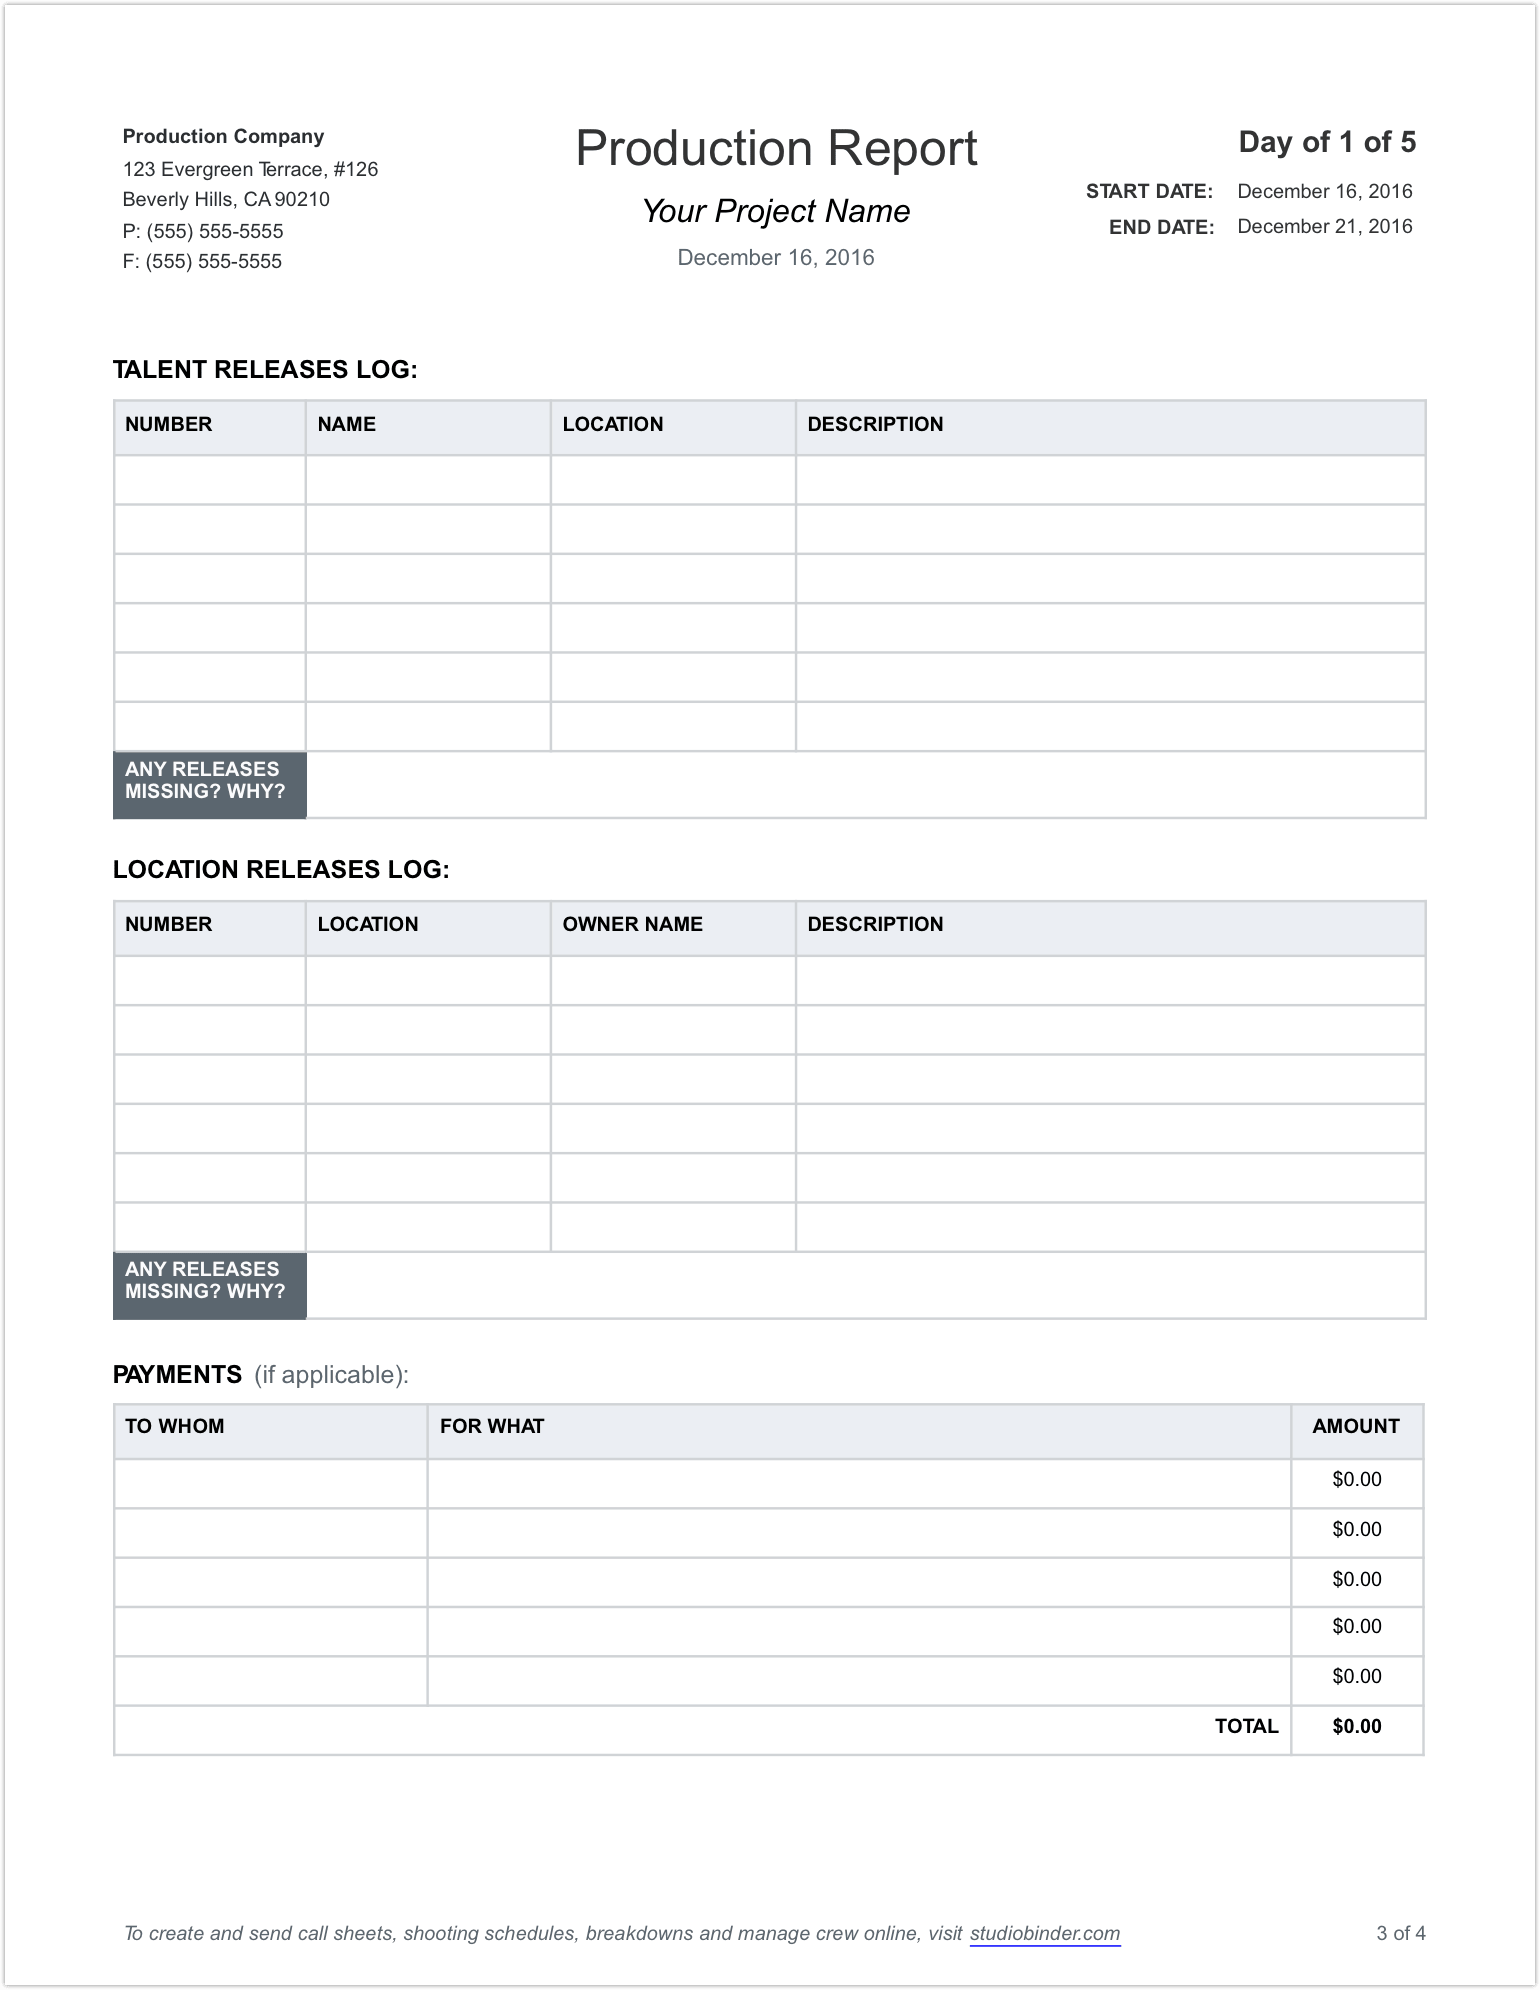 Daily Production Report Template - Page 3 - StudioBinder